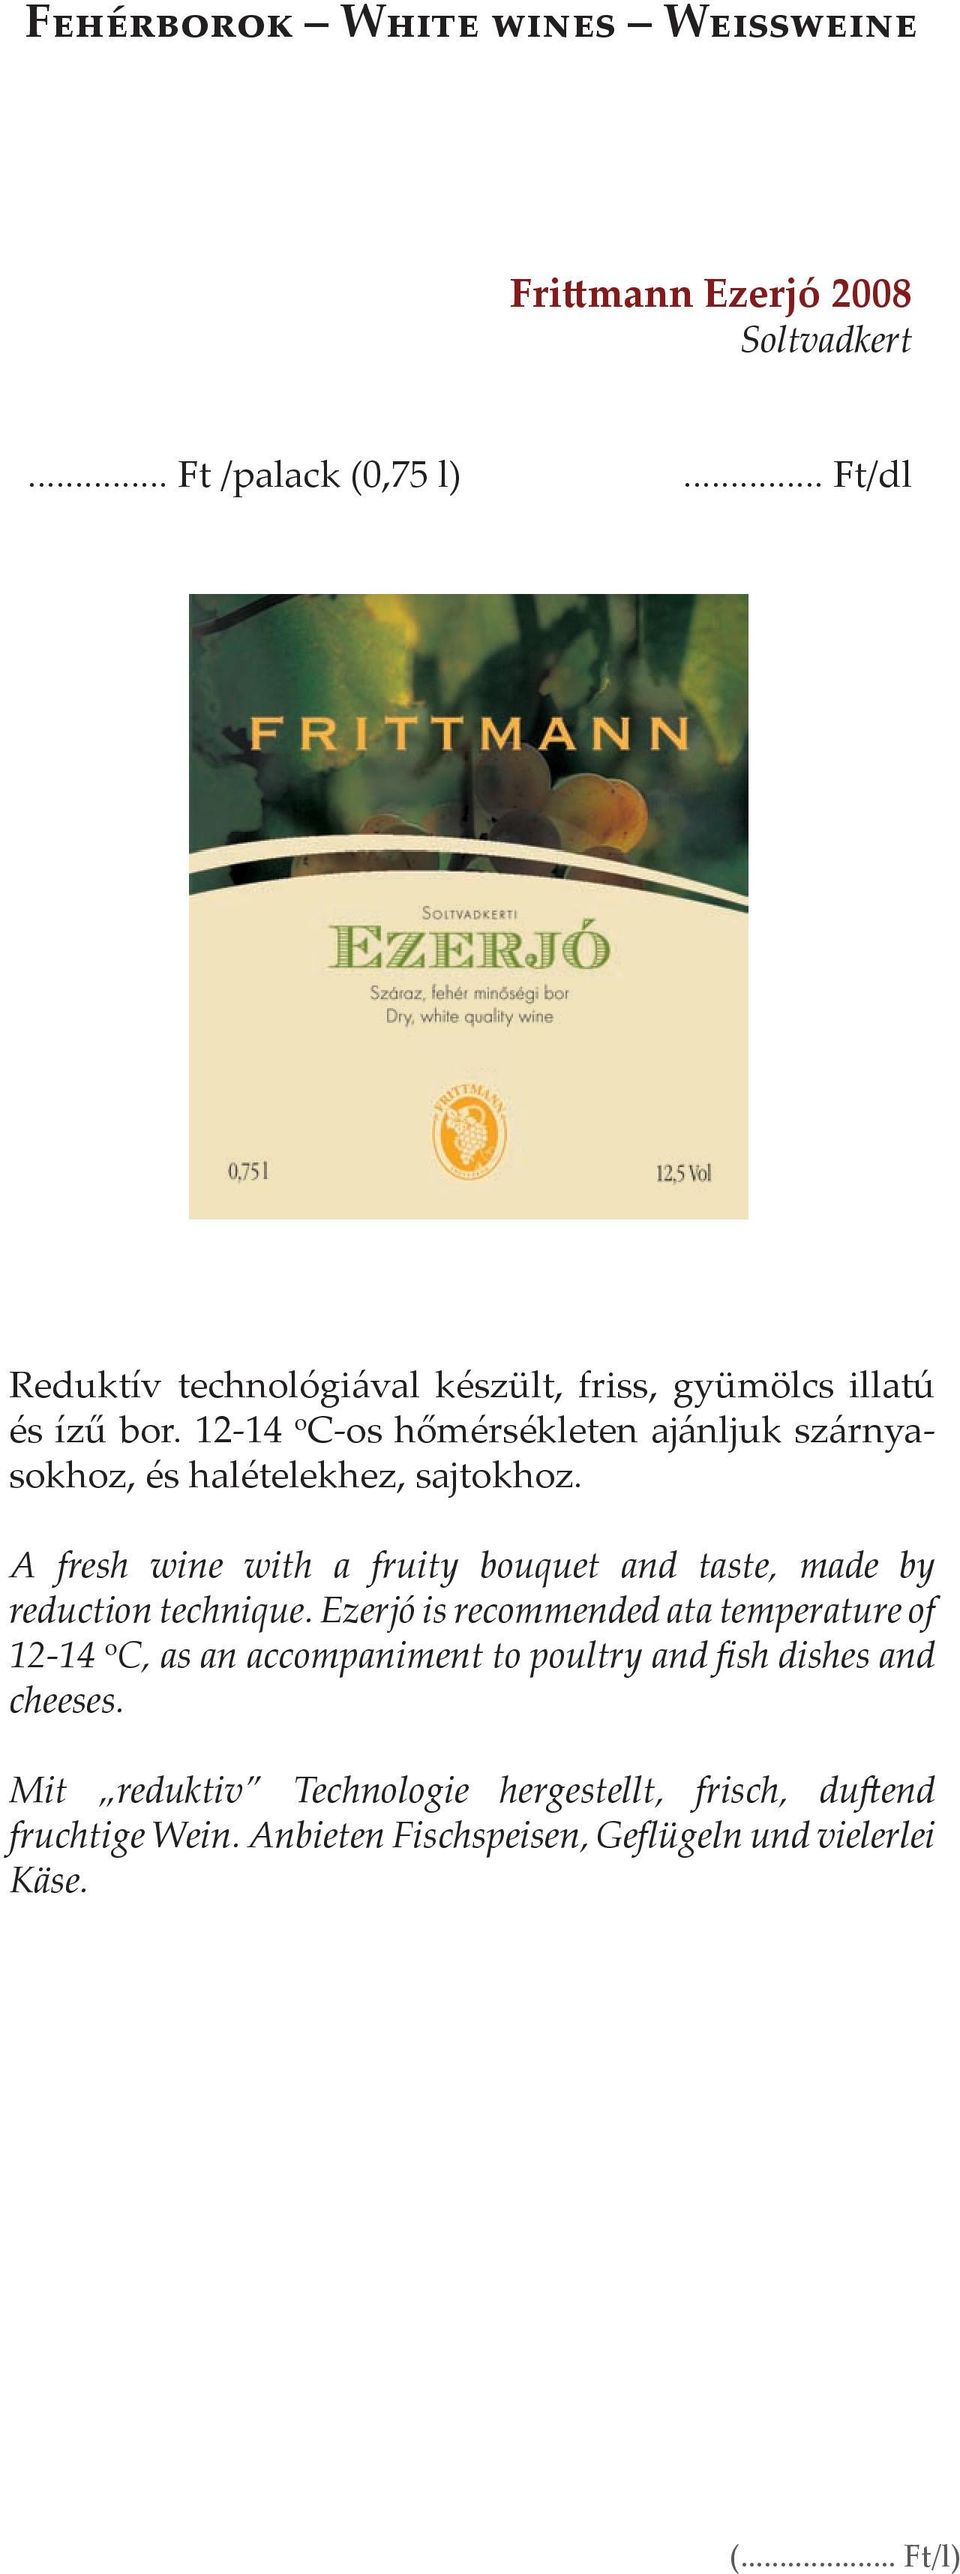 A fresh wine with a fruity bouquet and taste, made by reduction technique.